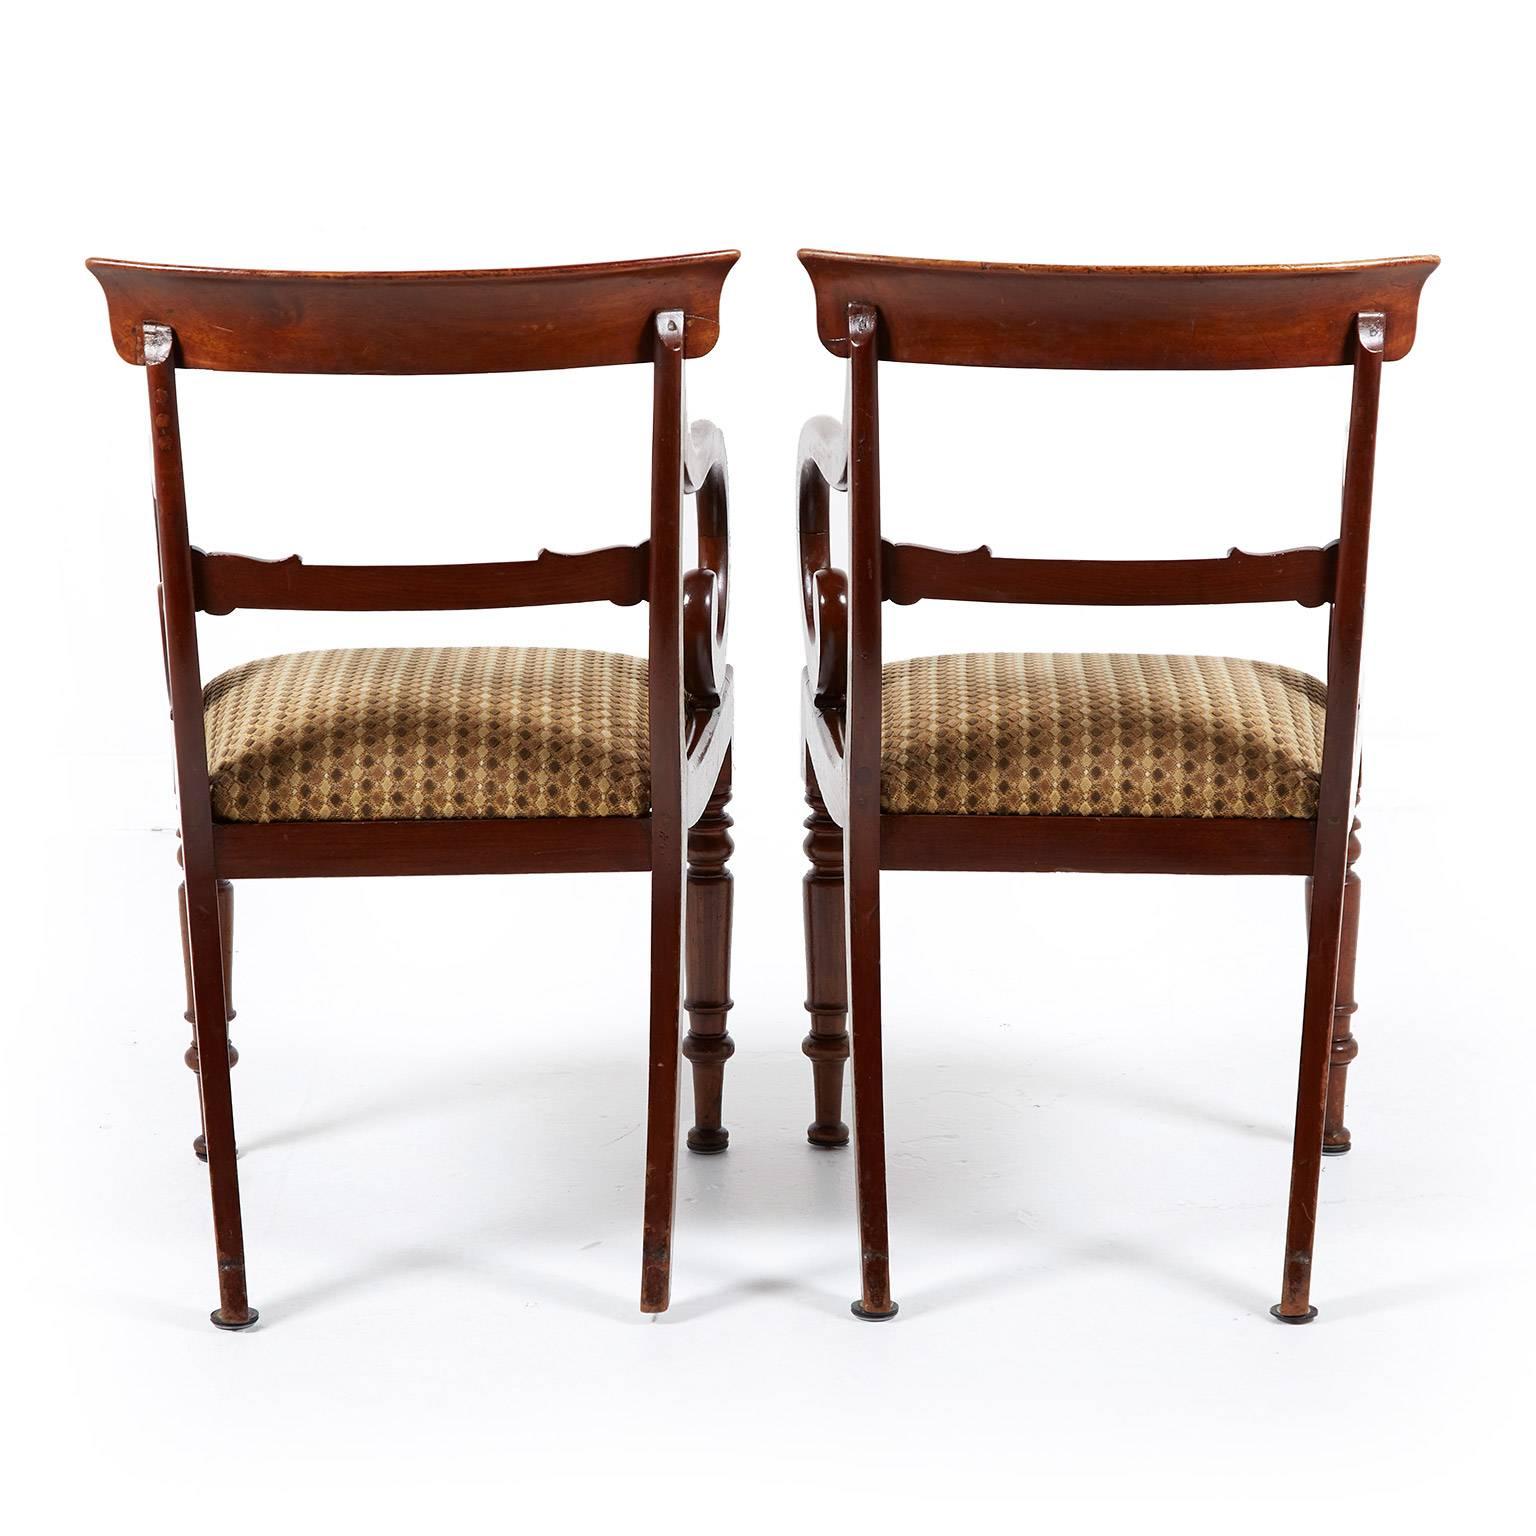 Turned Pair of Antique English Regency Mahogany Armchairs